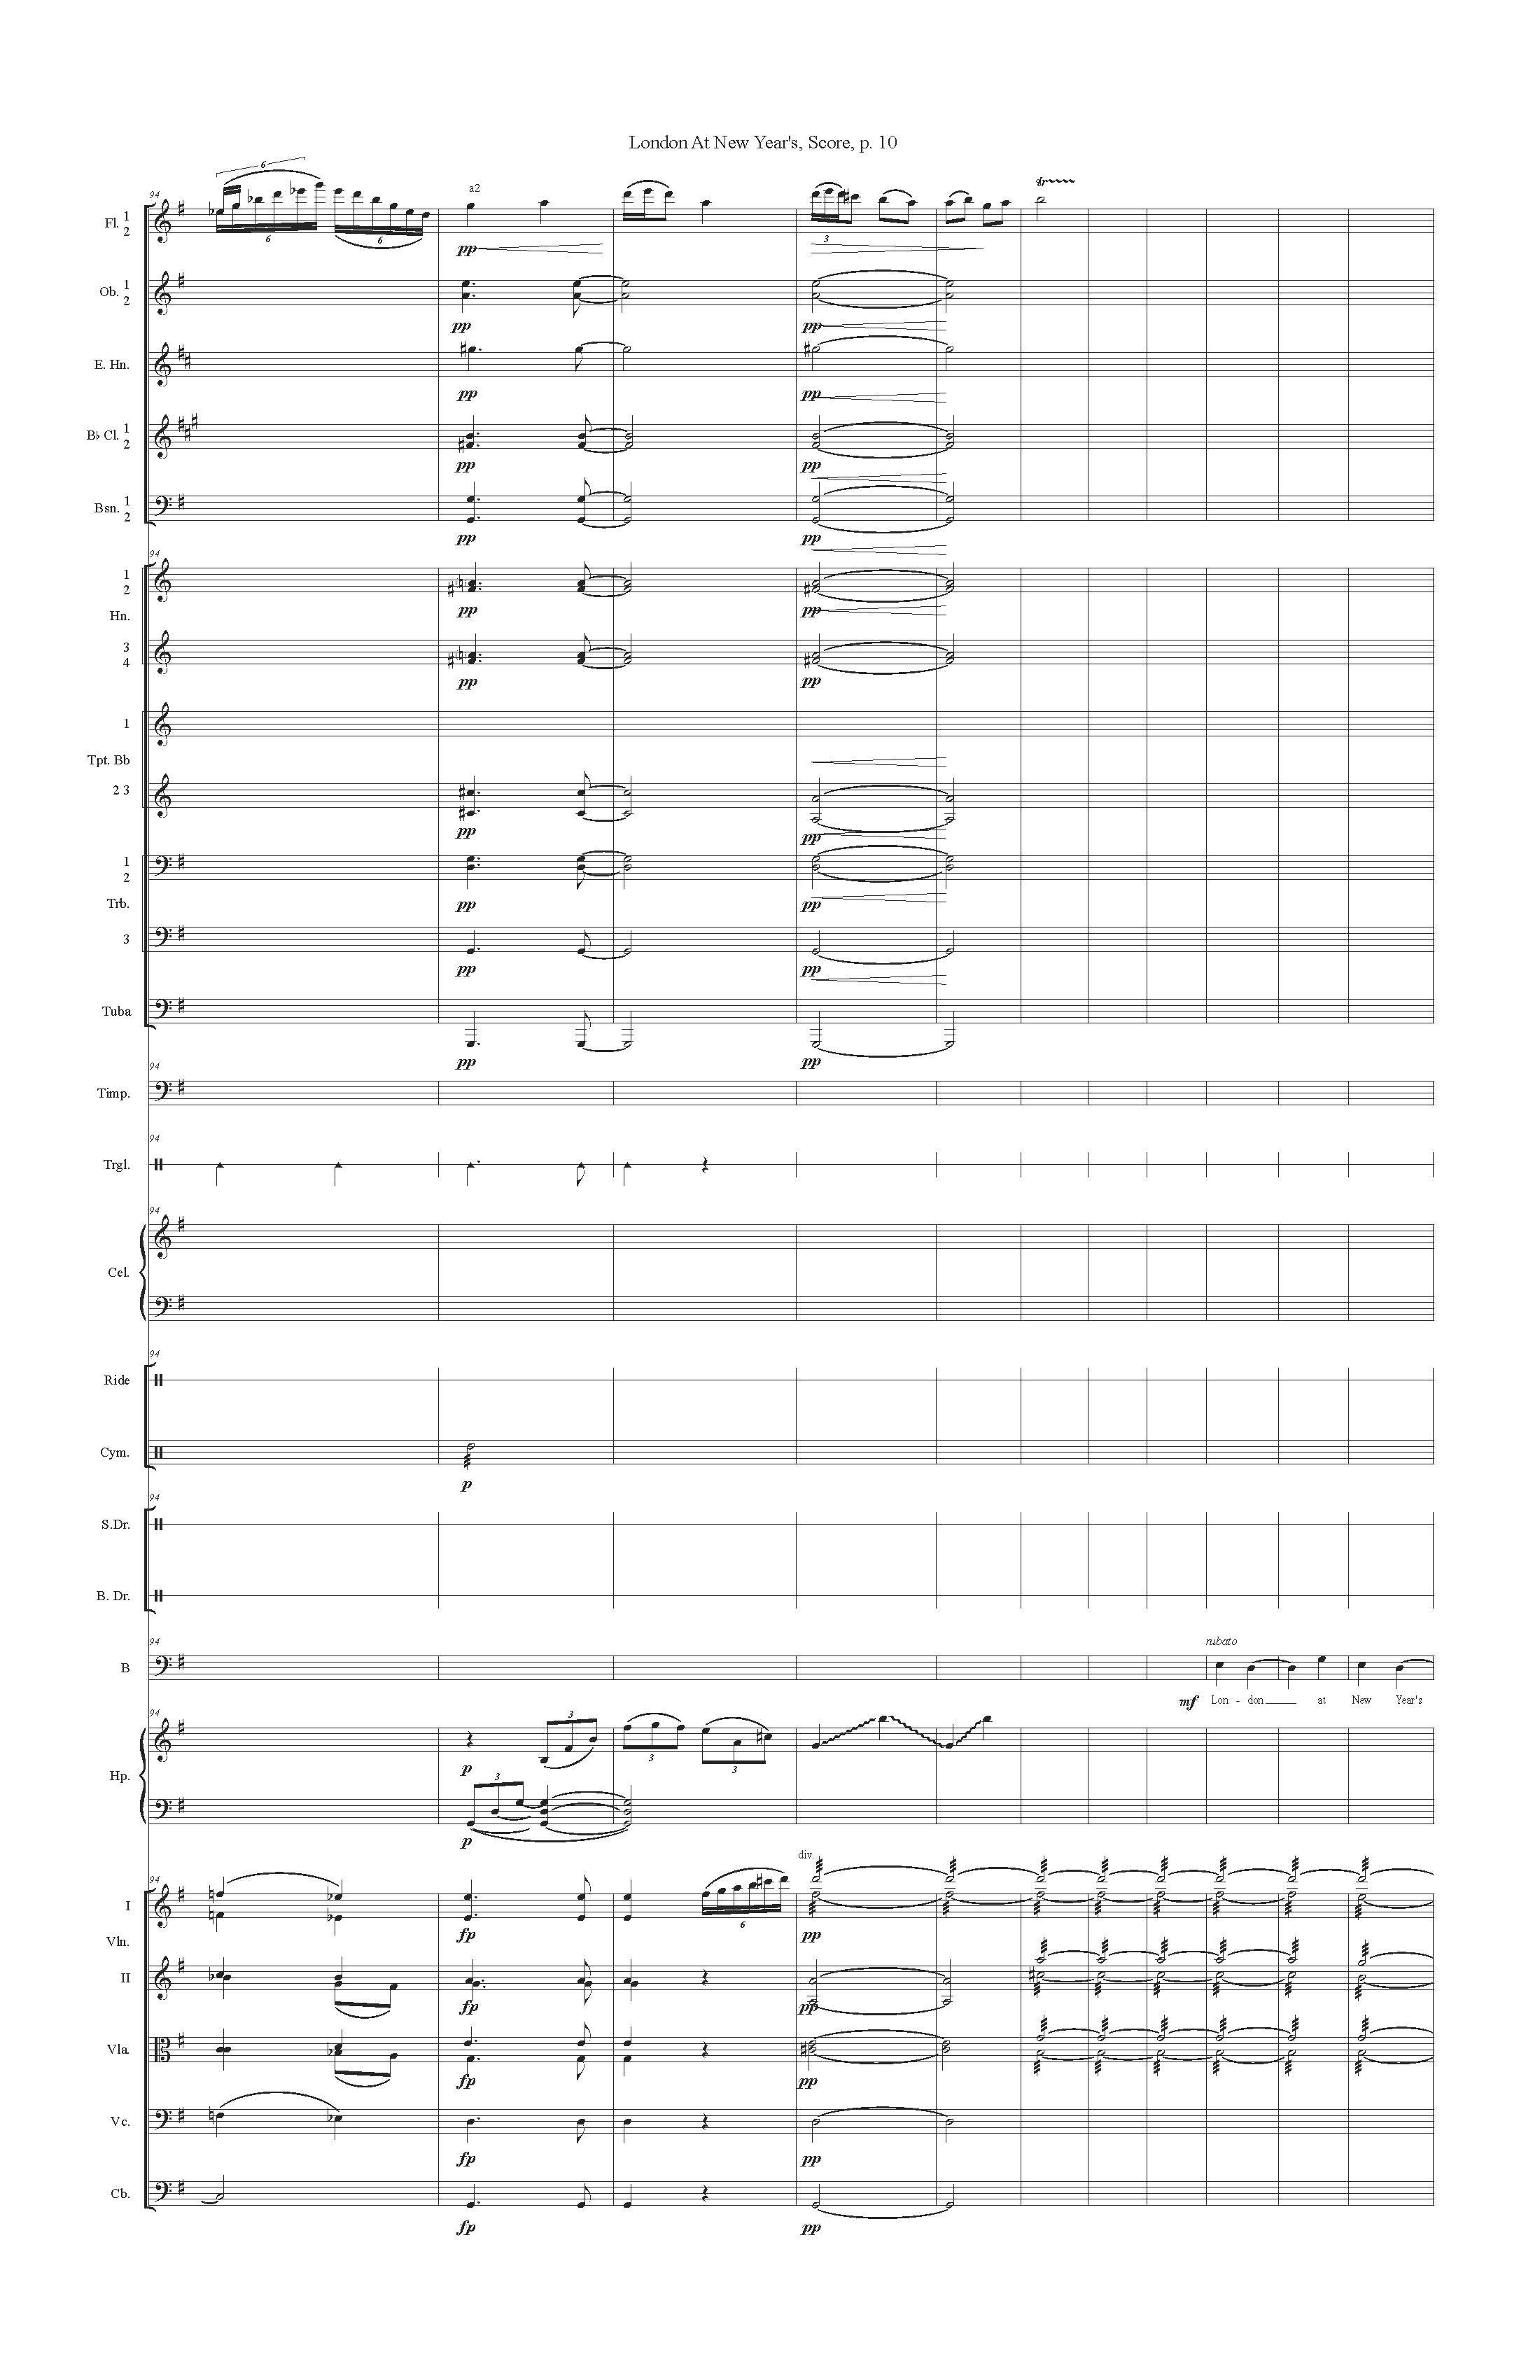 LONDON AT NEW YEARS ORCH - Score_Page_10.jpg